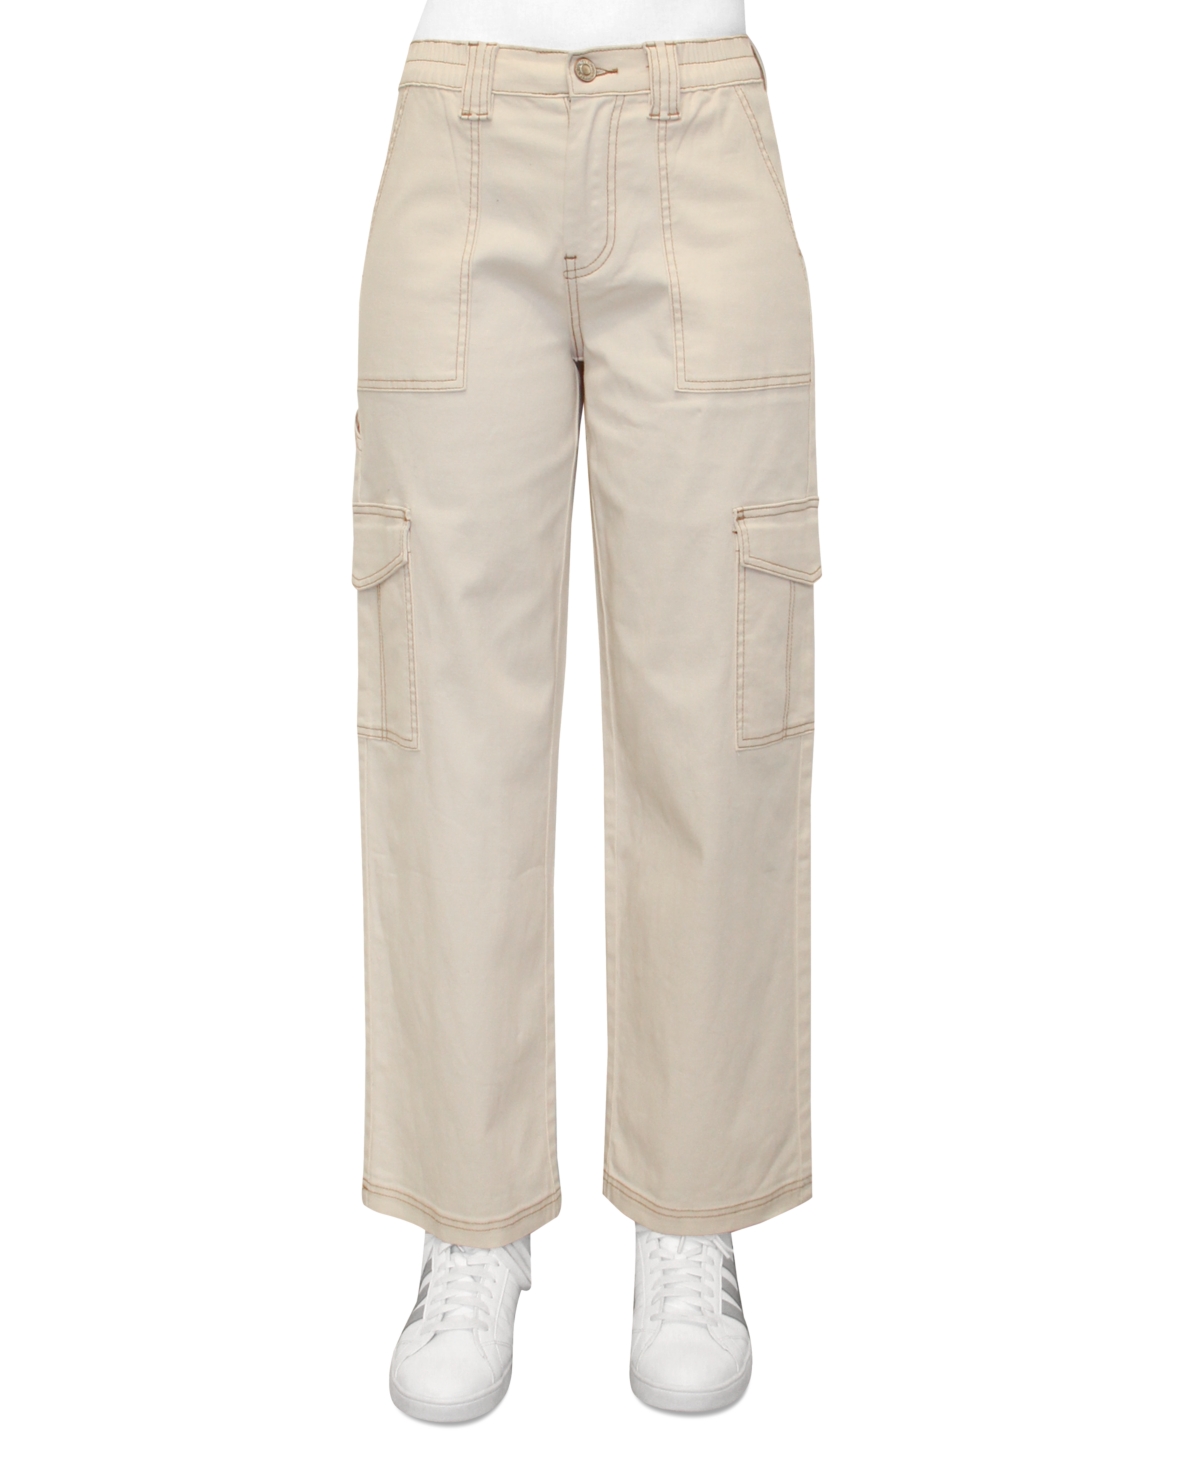 Almost Famous Crave Fame Juniors' High-Rise Utility Cargo Skater Pants